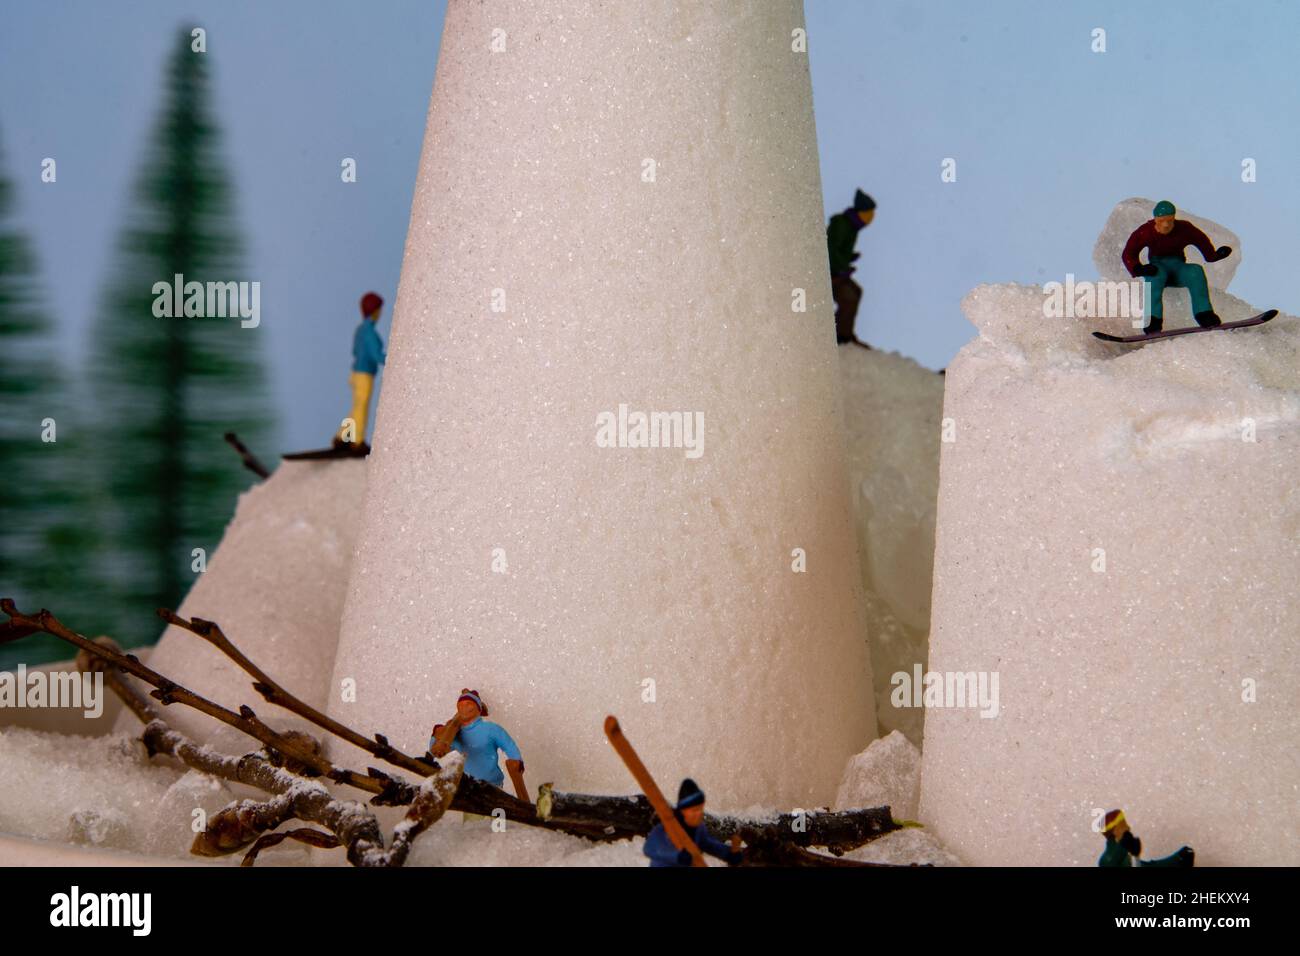 skiing and snowboarding on a mountain made from sugar still life Stock Photo